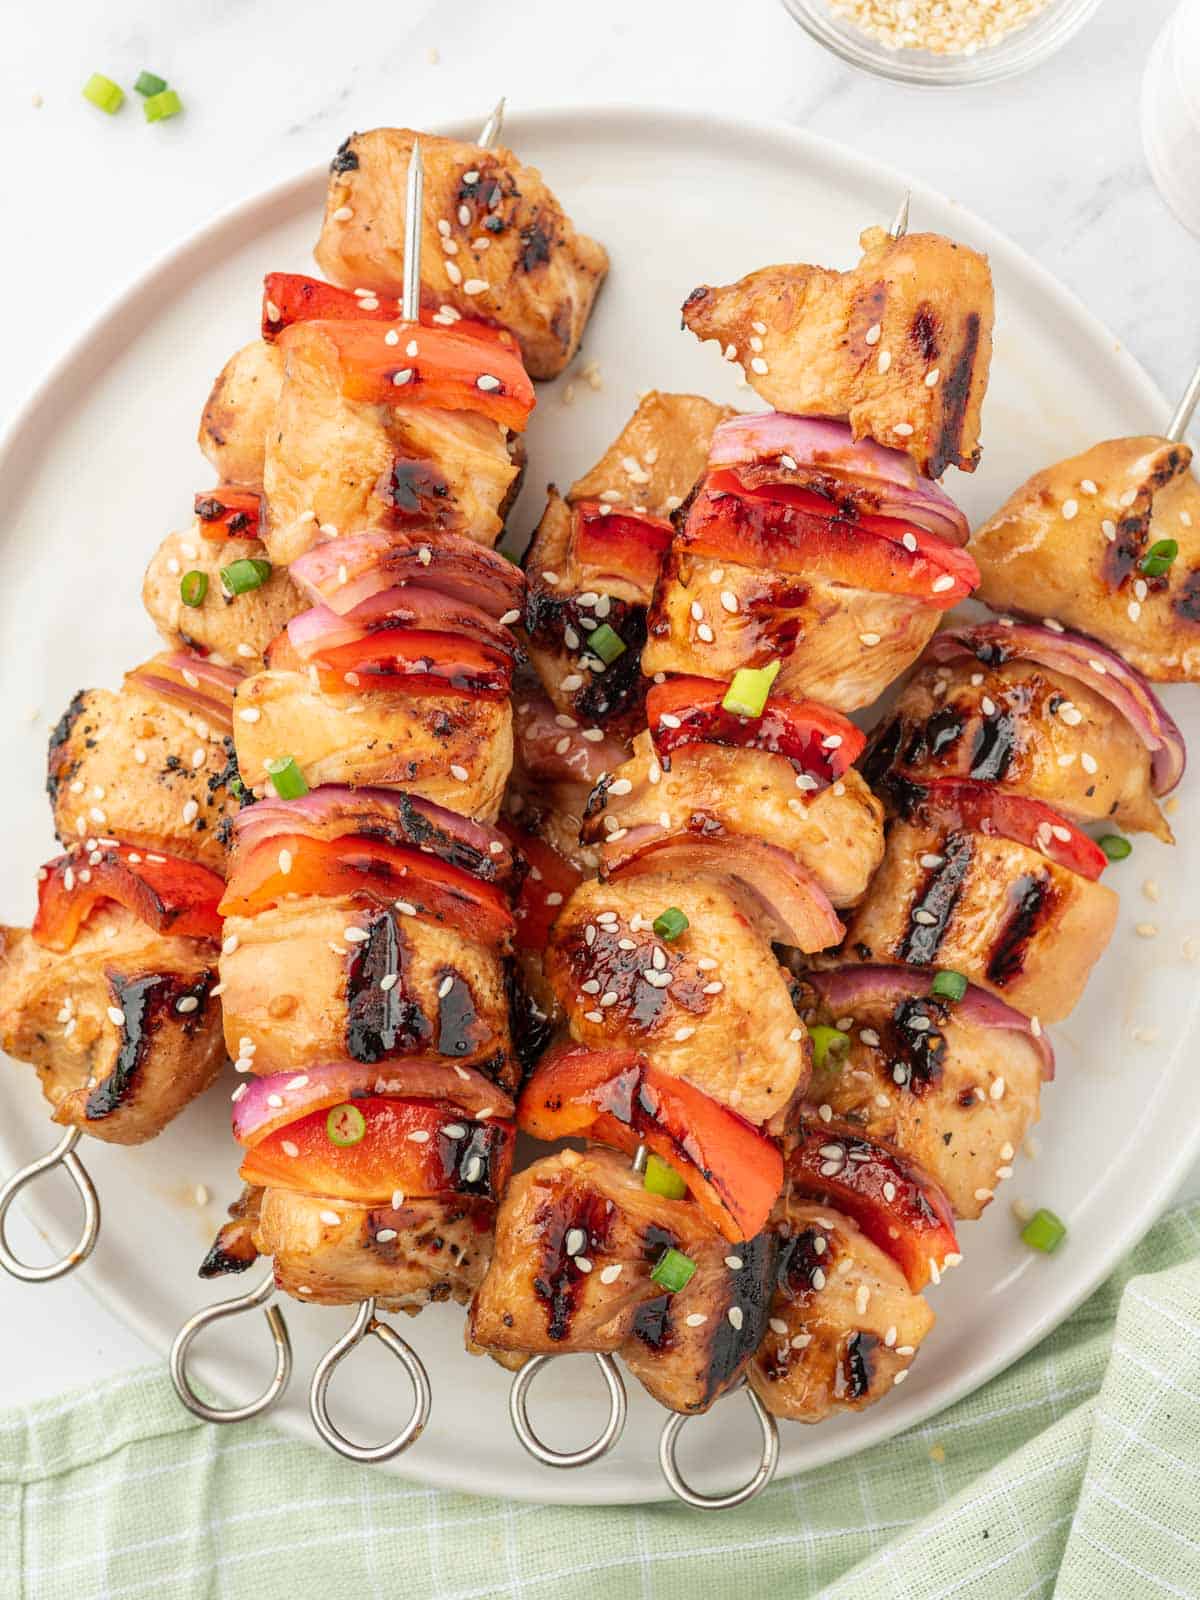 Chicken, red peppers and red onion grilled on skewers and placed on a platter.